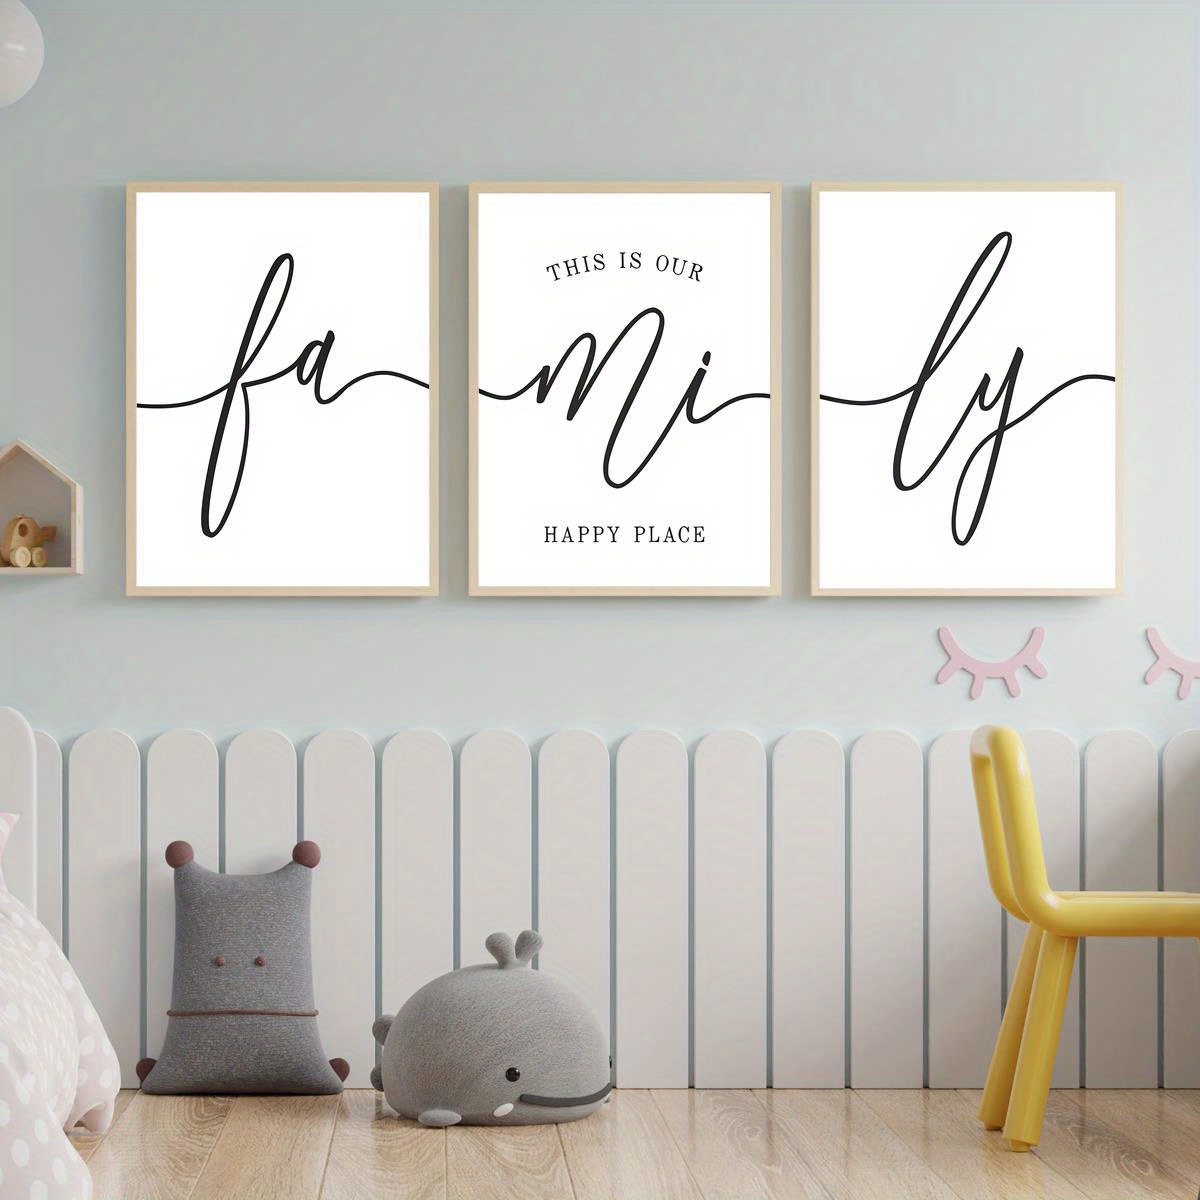 This is Our Happy Place, Family Wall Decor, Set of 3 Printable